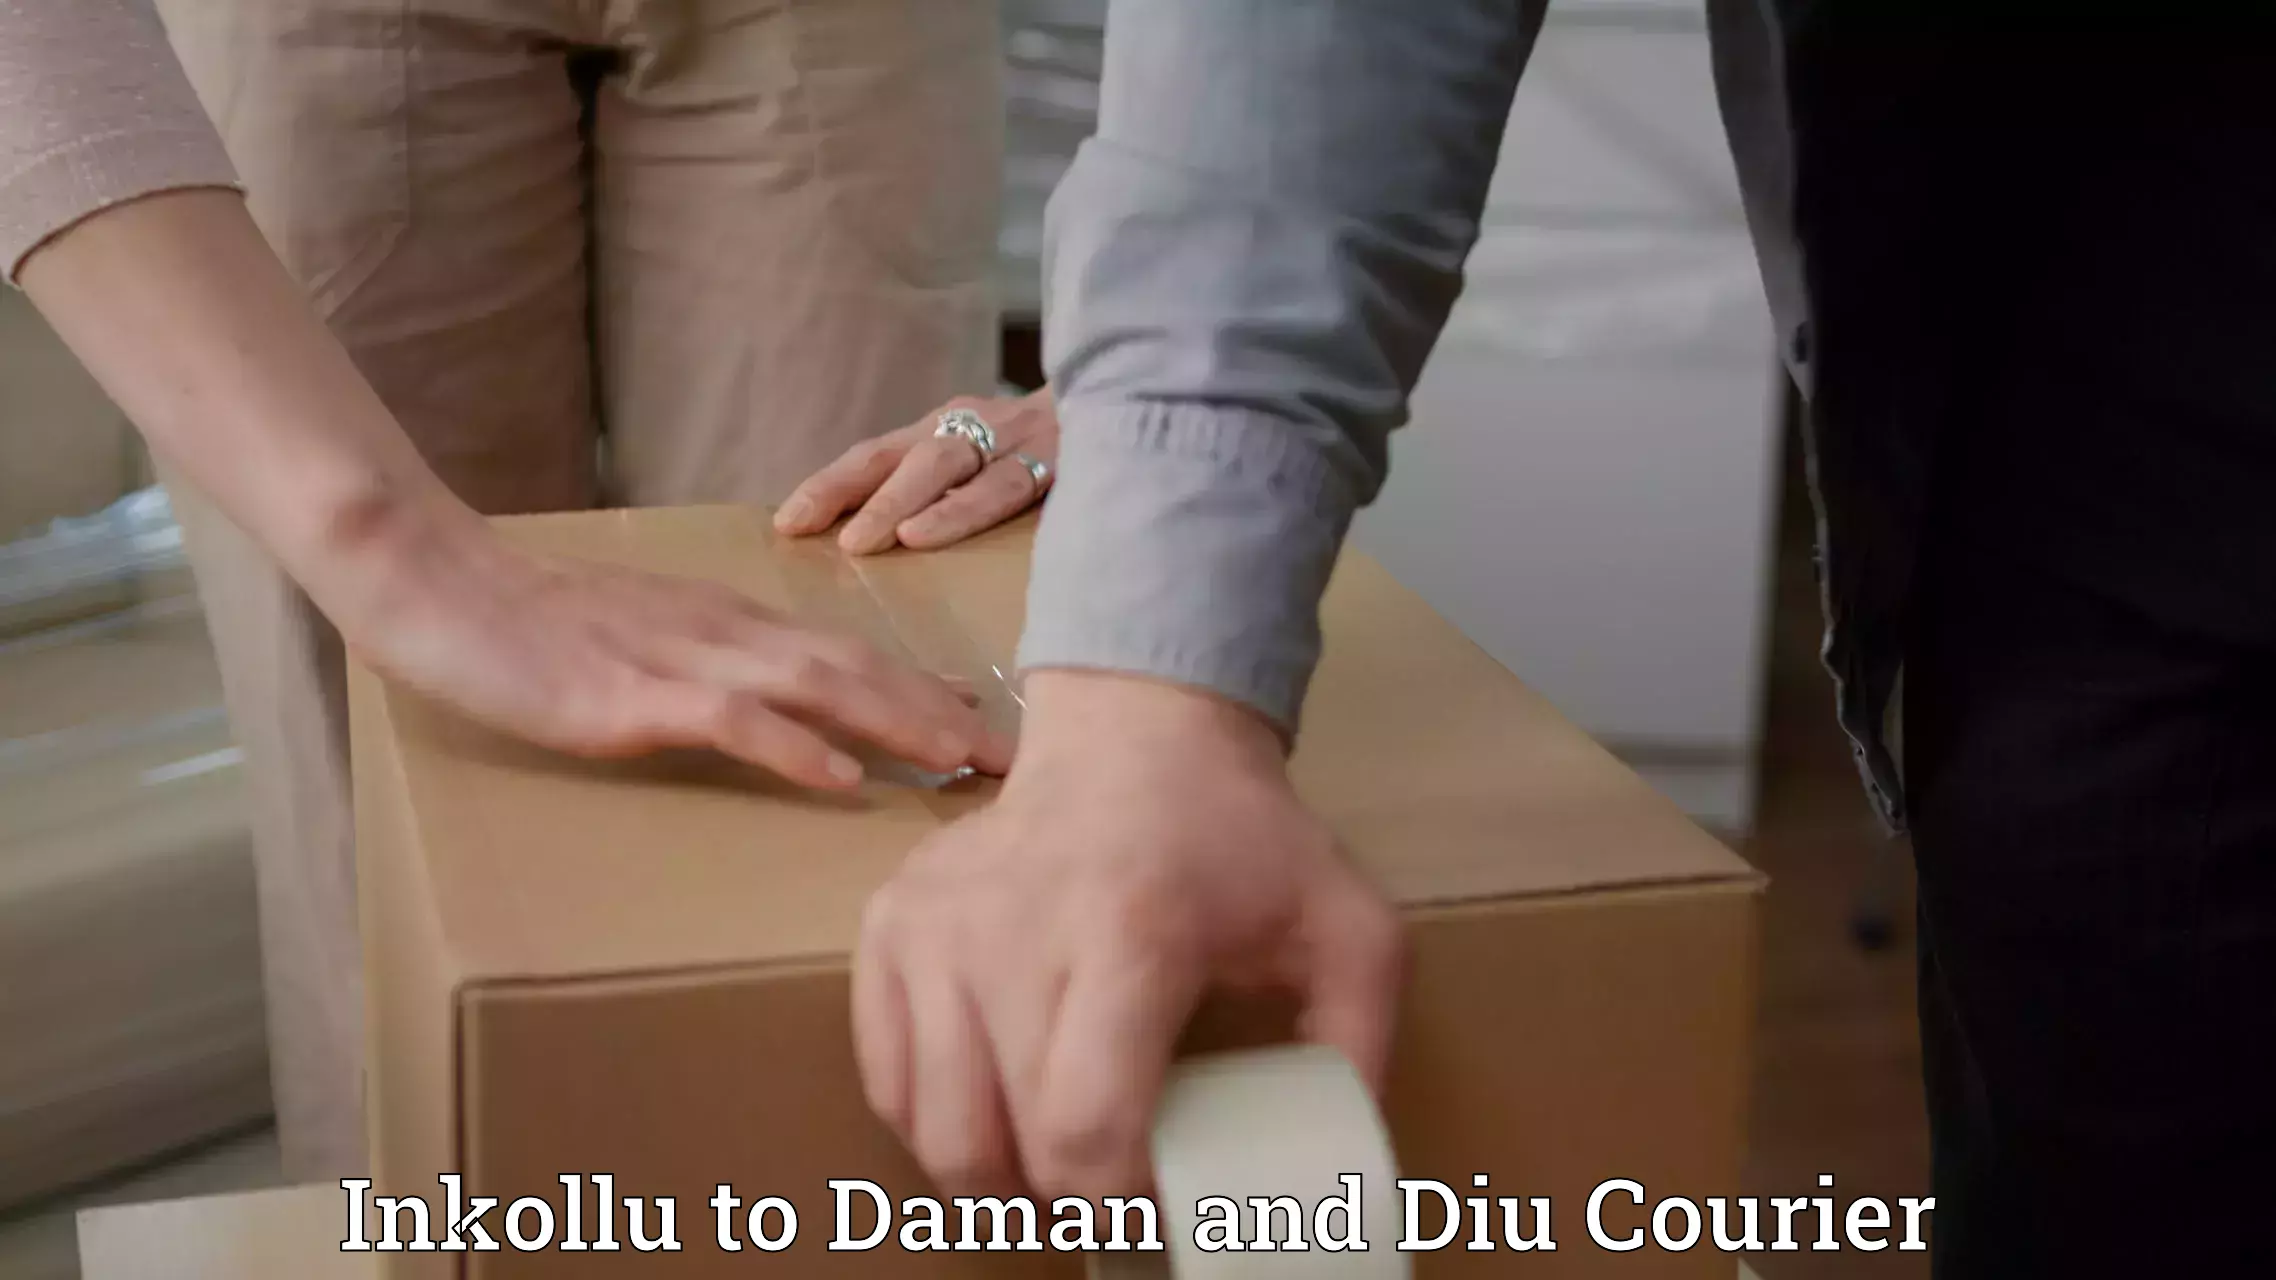 Parcel service for businesses Inkollu to Diu